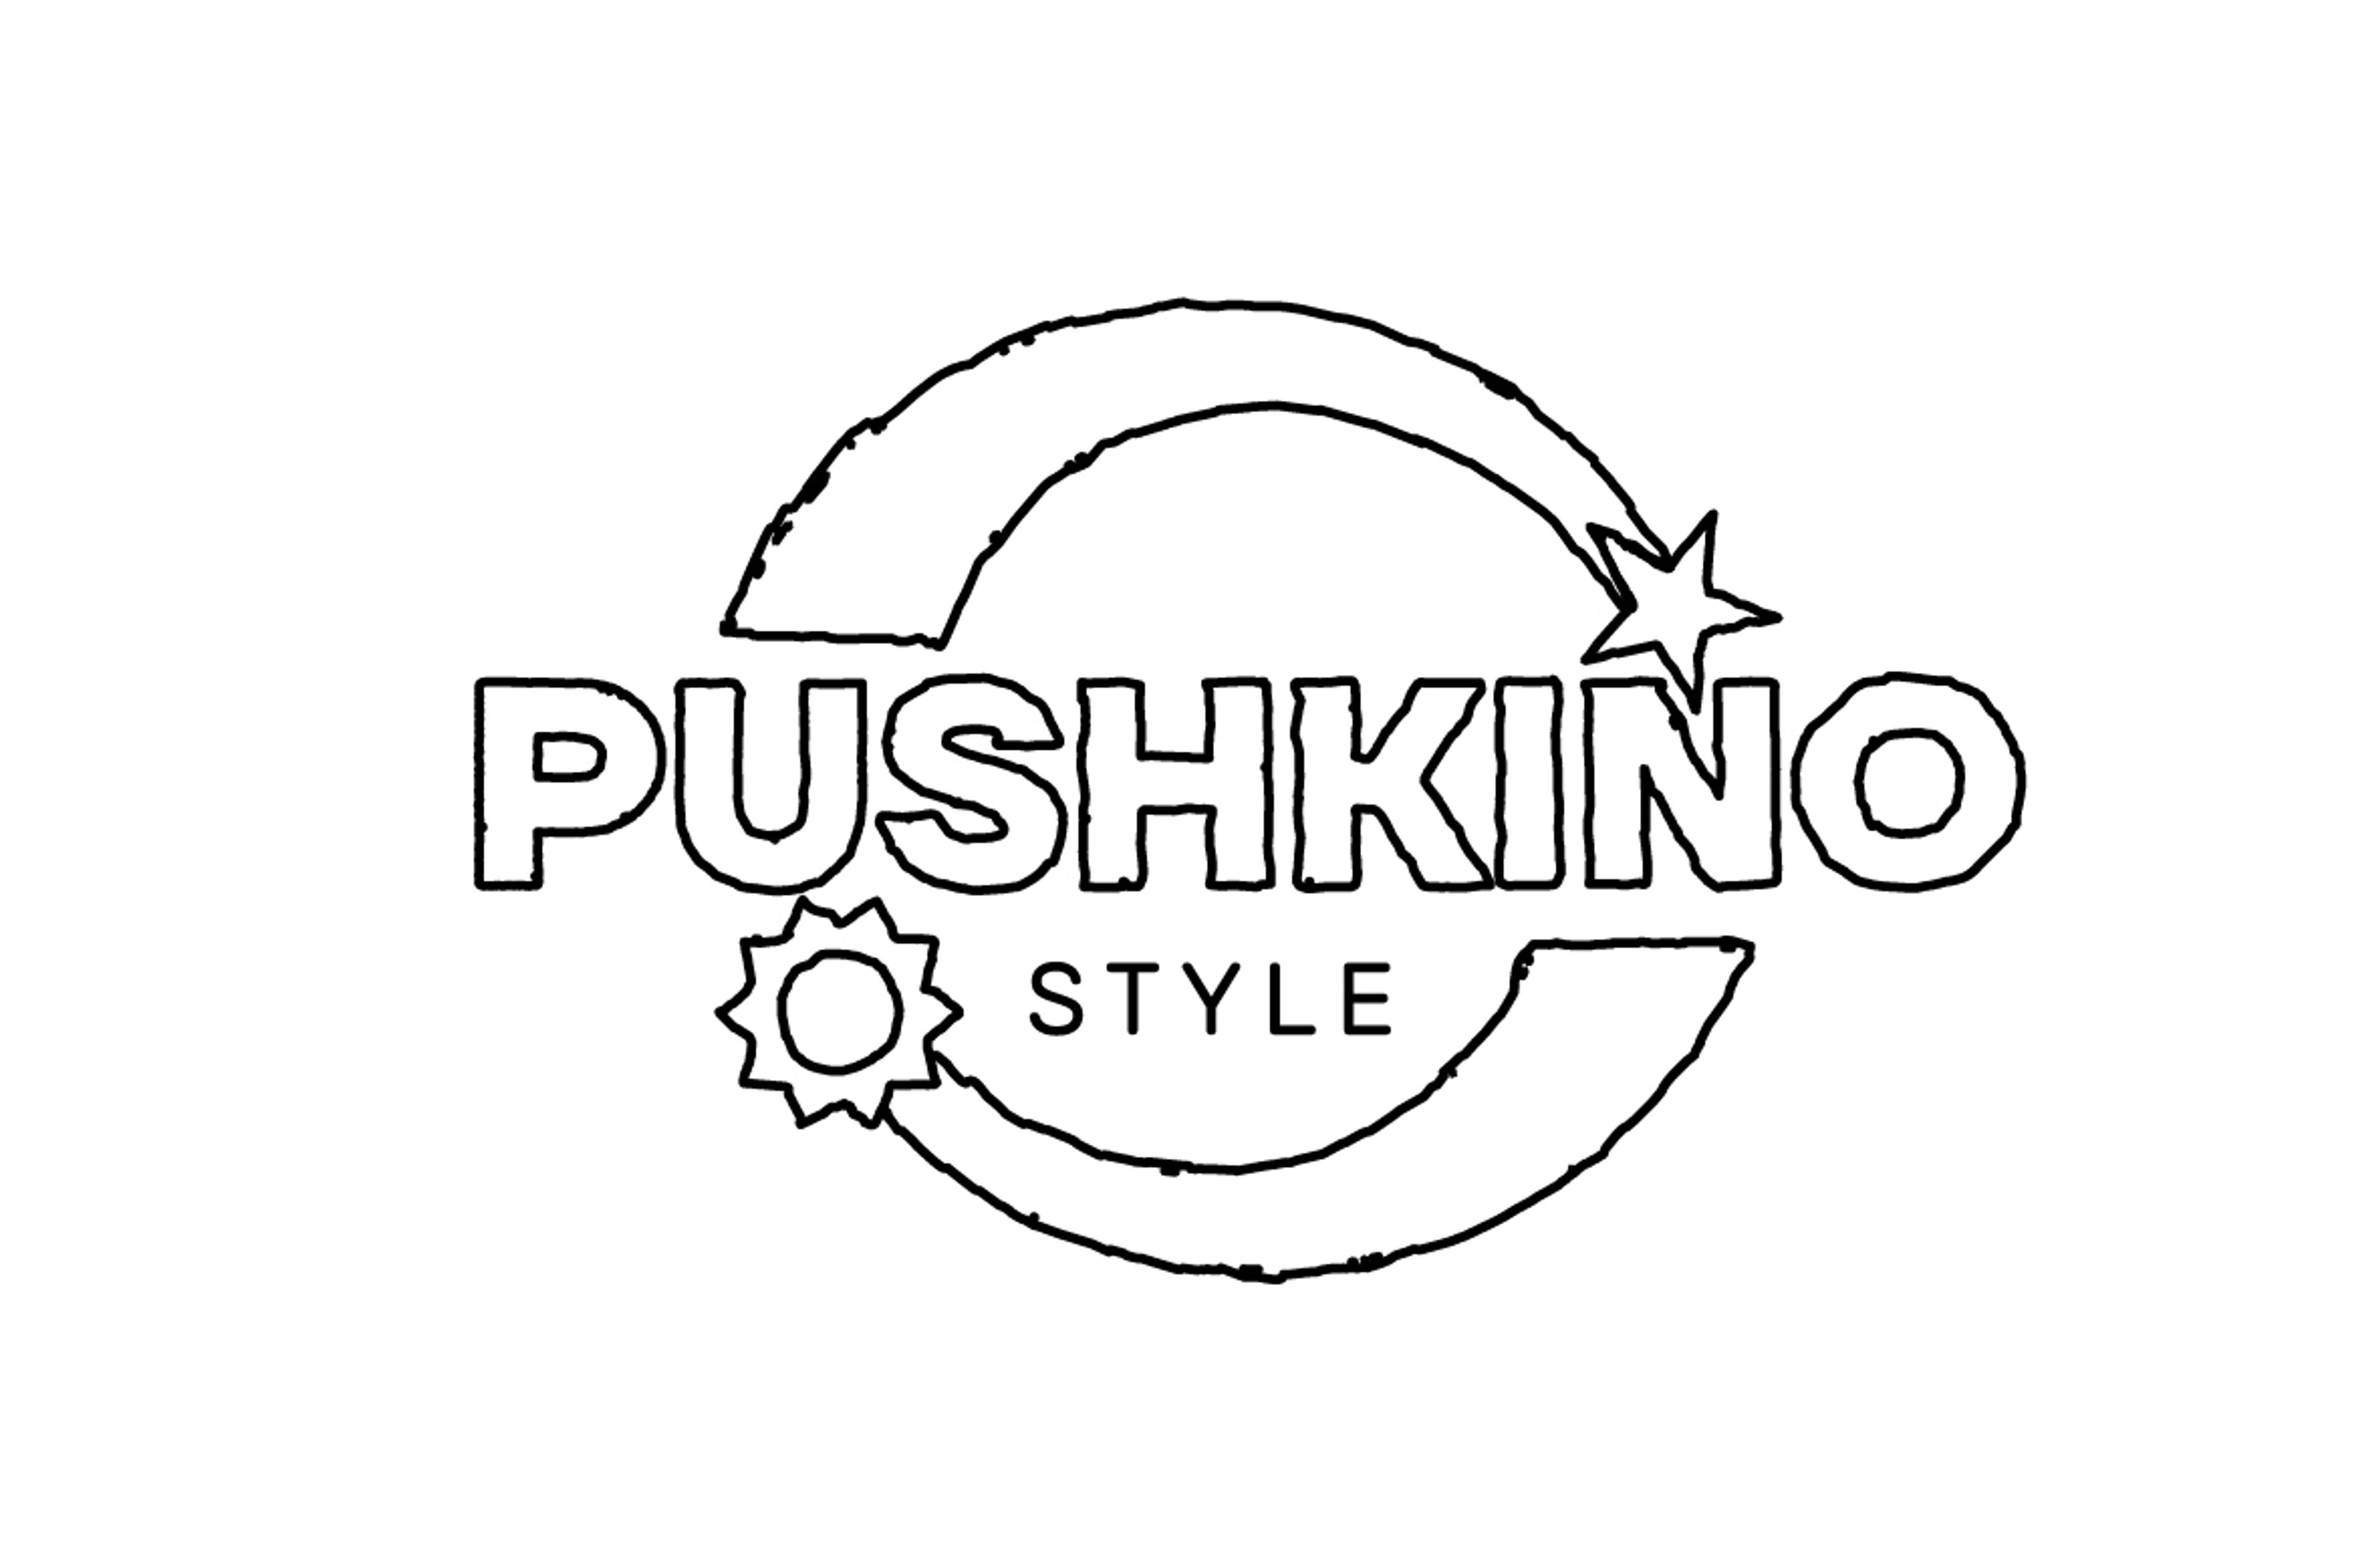 A line drawing of the Pushkino Style logo. Pushkino os written in large letters in the centre, and Style is written below. Two half circles with starts at the end - looking a bit like meteors - frame the words.